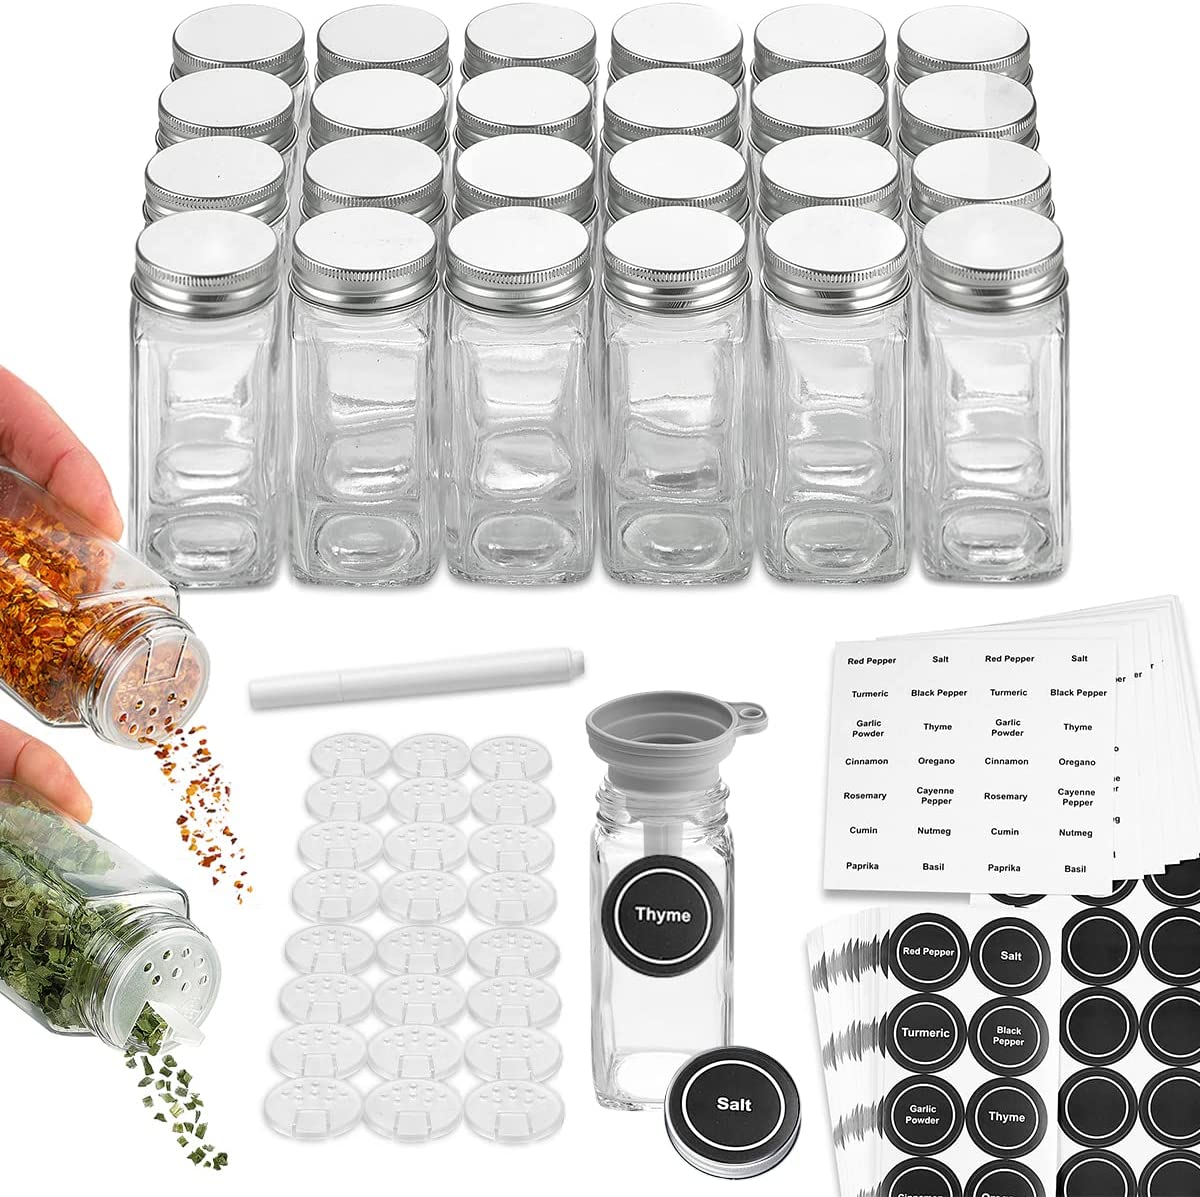 Spice Bottles Empty Glass with Labels 4 oz - 24 Piece Spice Jars Spice Container Shaker Lids, Airtight Metal Caps and Chalkboard/Clear PVC Seasoning Labels, Chalk Marker & Collapsible Funnel - image 1 of 10